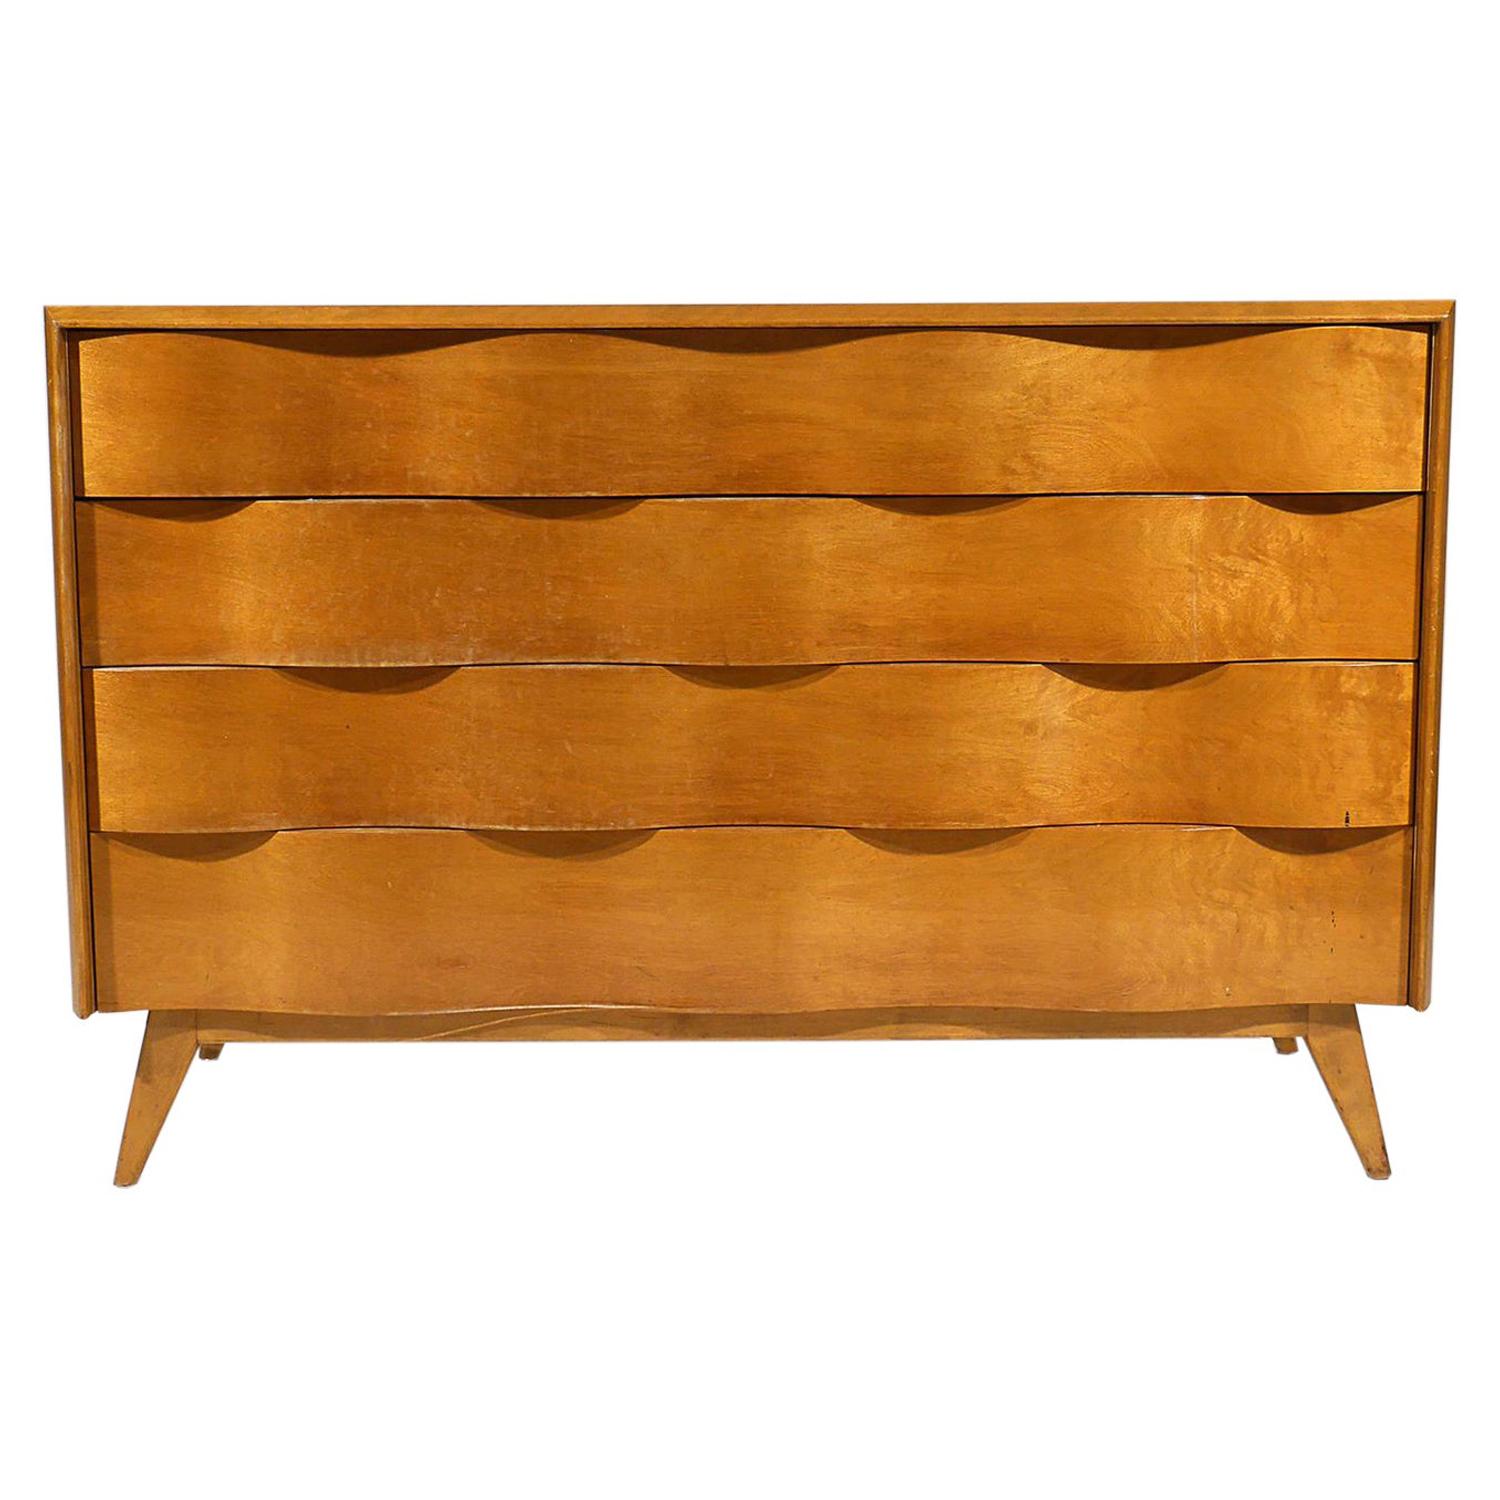 20th Century Swedish Birchwood Wave Front Chest of Drawers by Edmond J. Spence